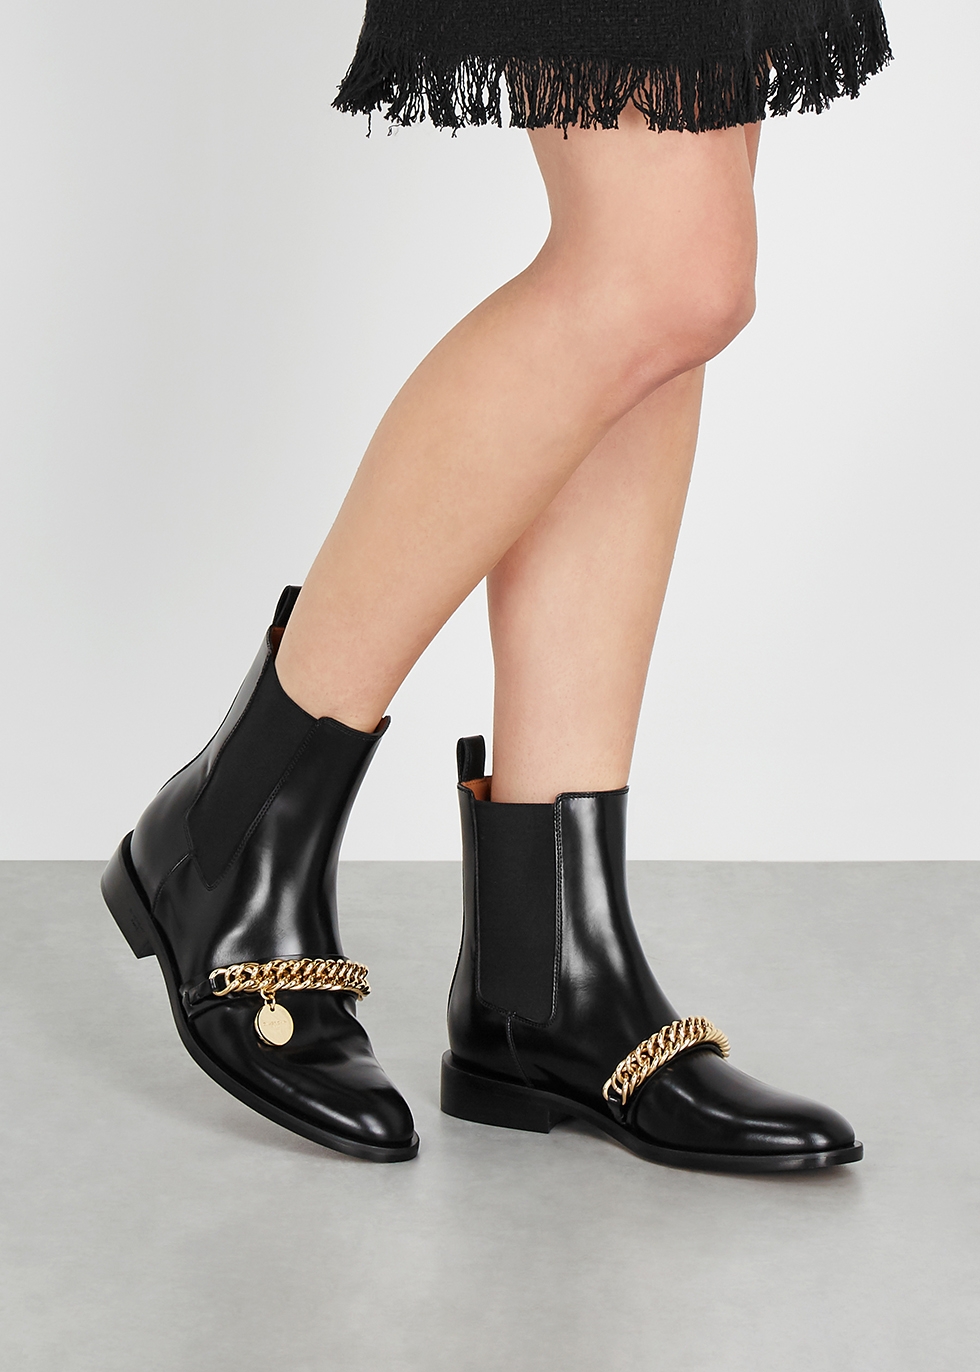 givenchy black boots 